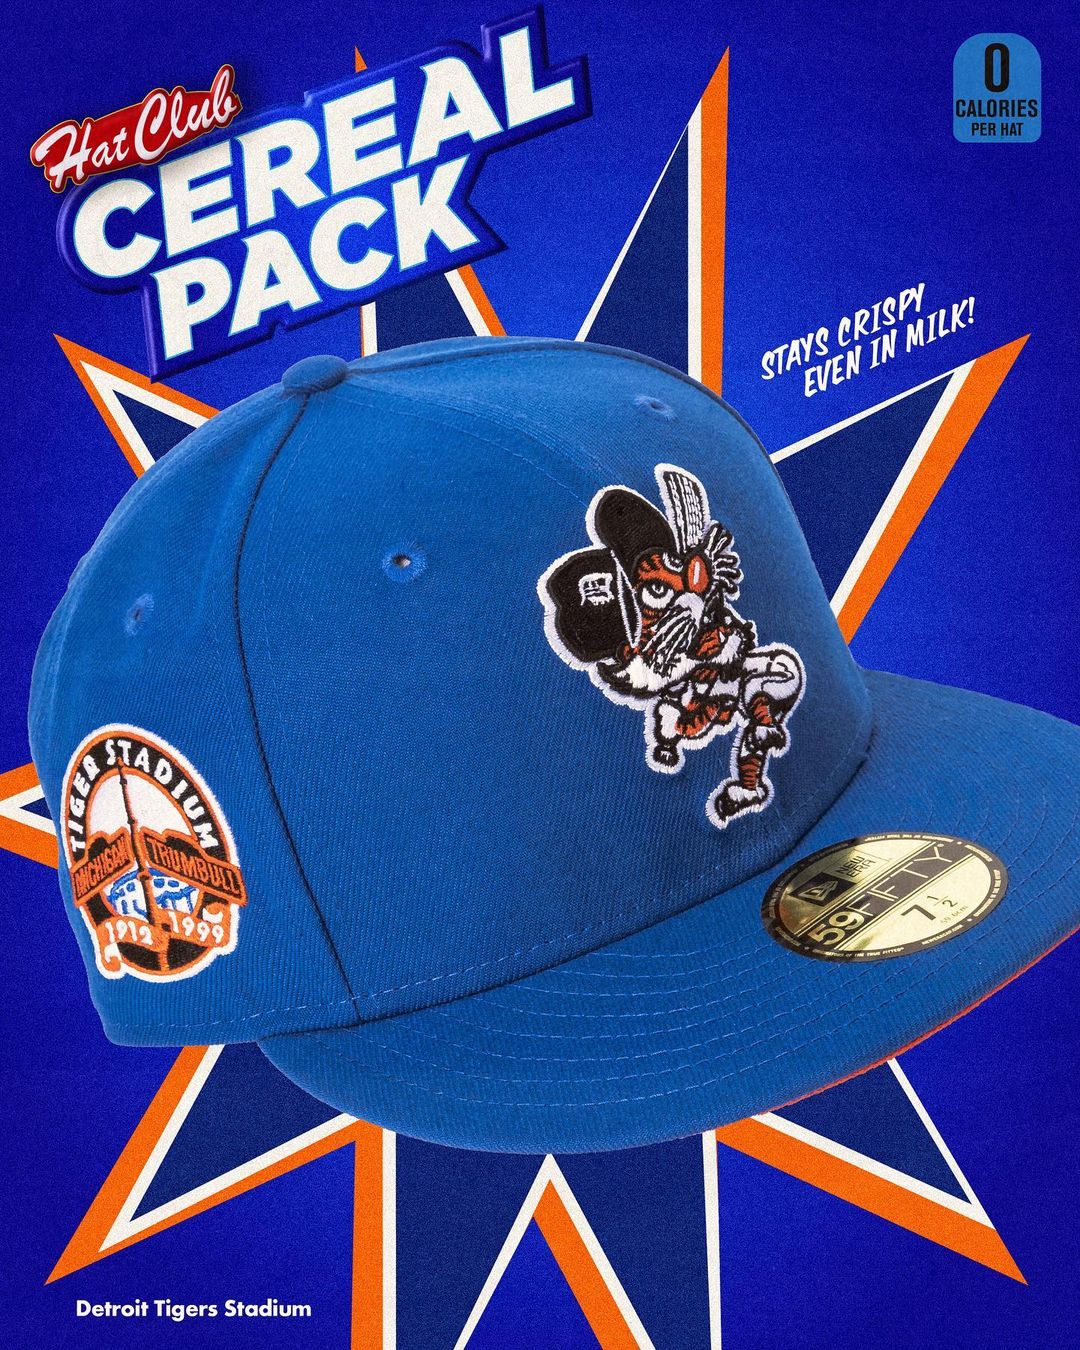 Cereal Pack Fitted Hats